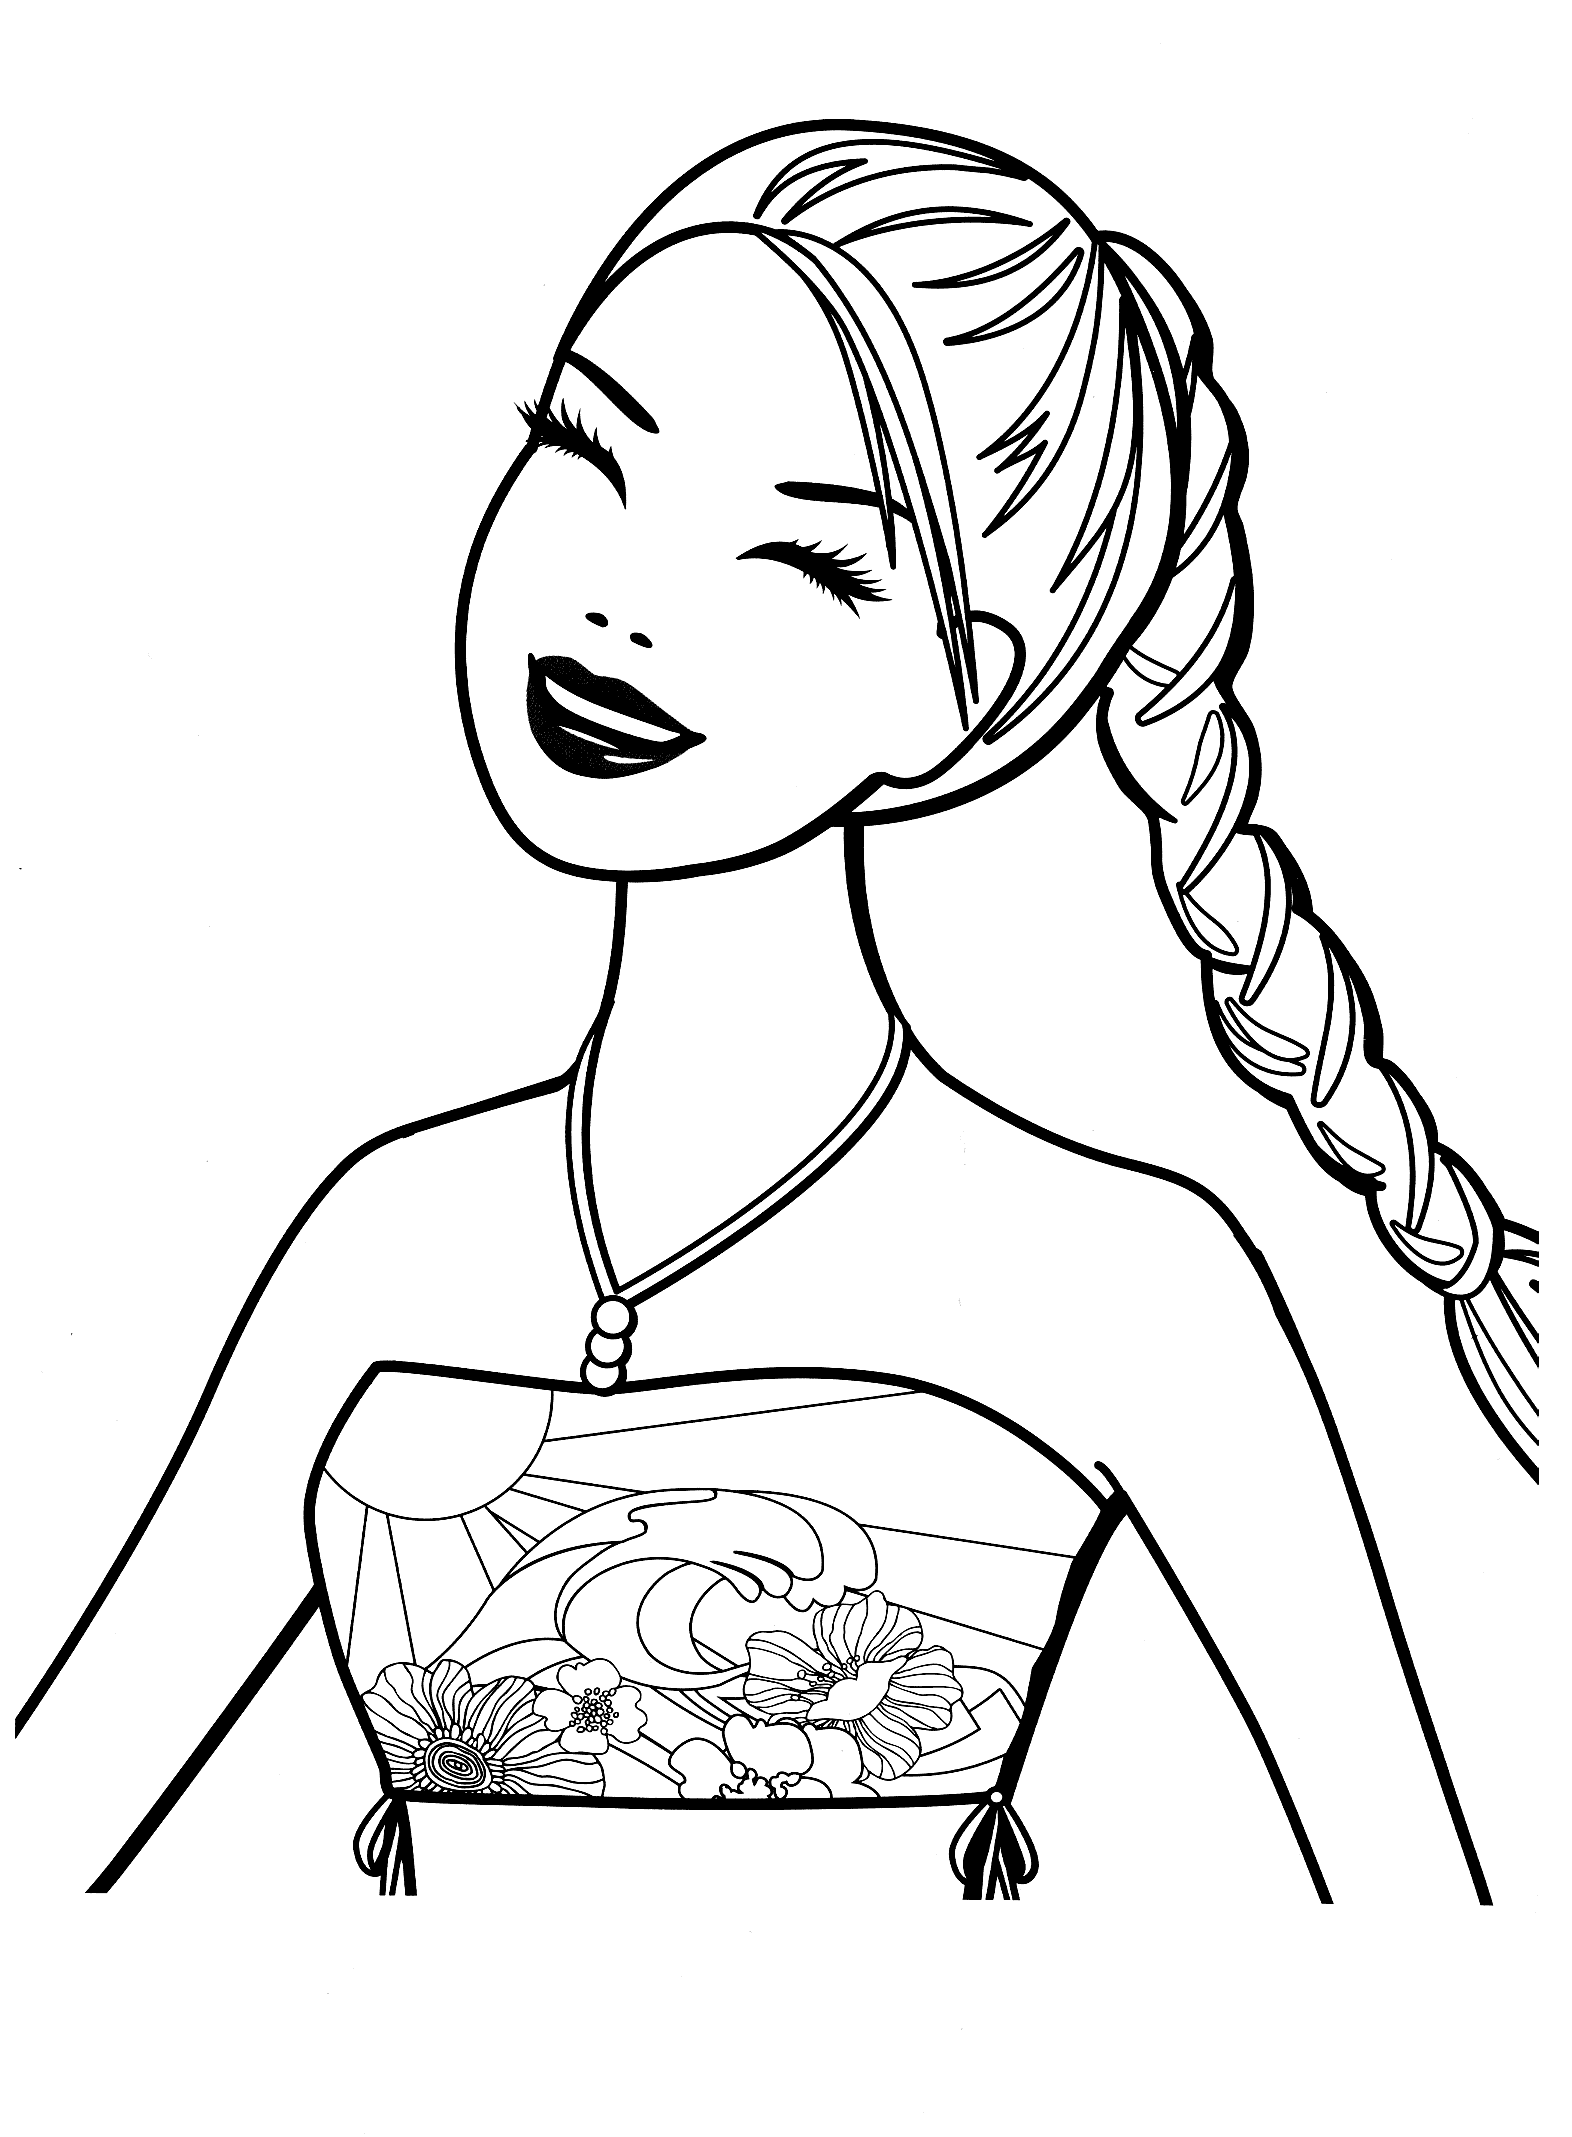 Coloring page Barbie with beautiful braid